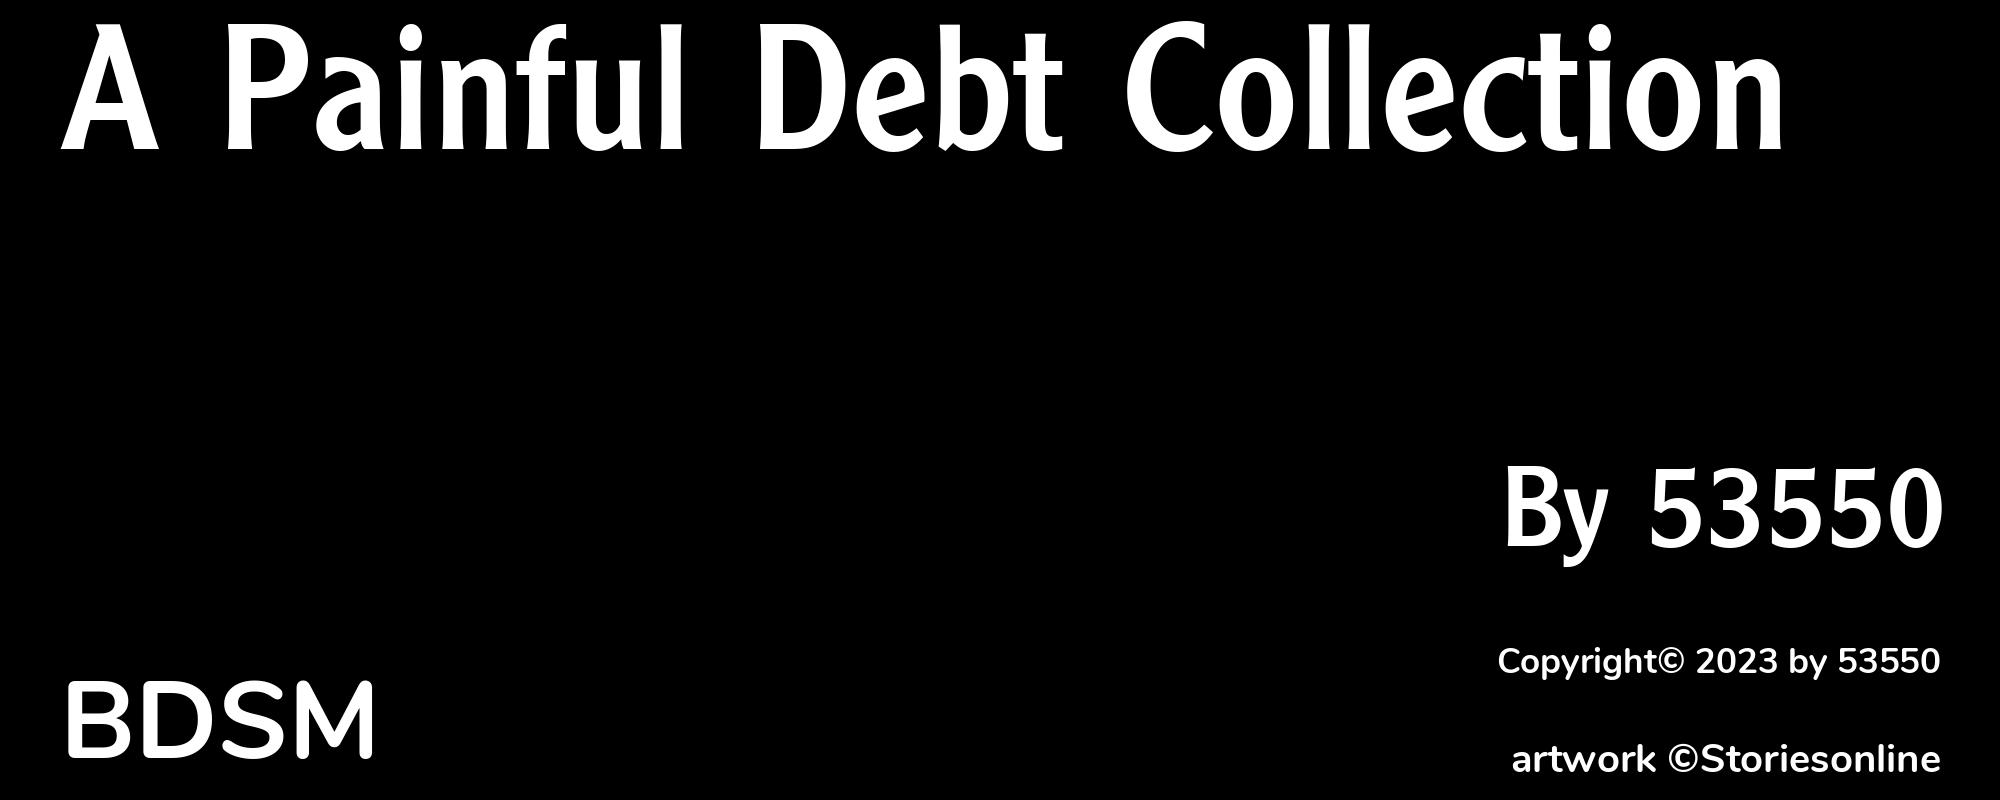 A Painful Debt Collection - Cover